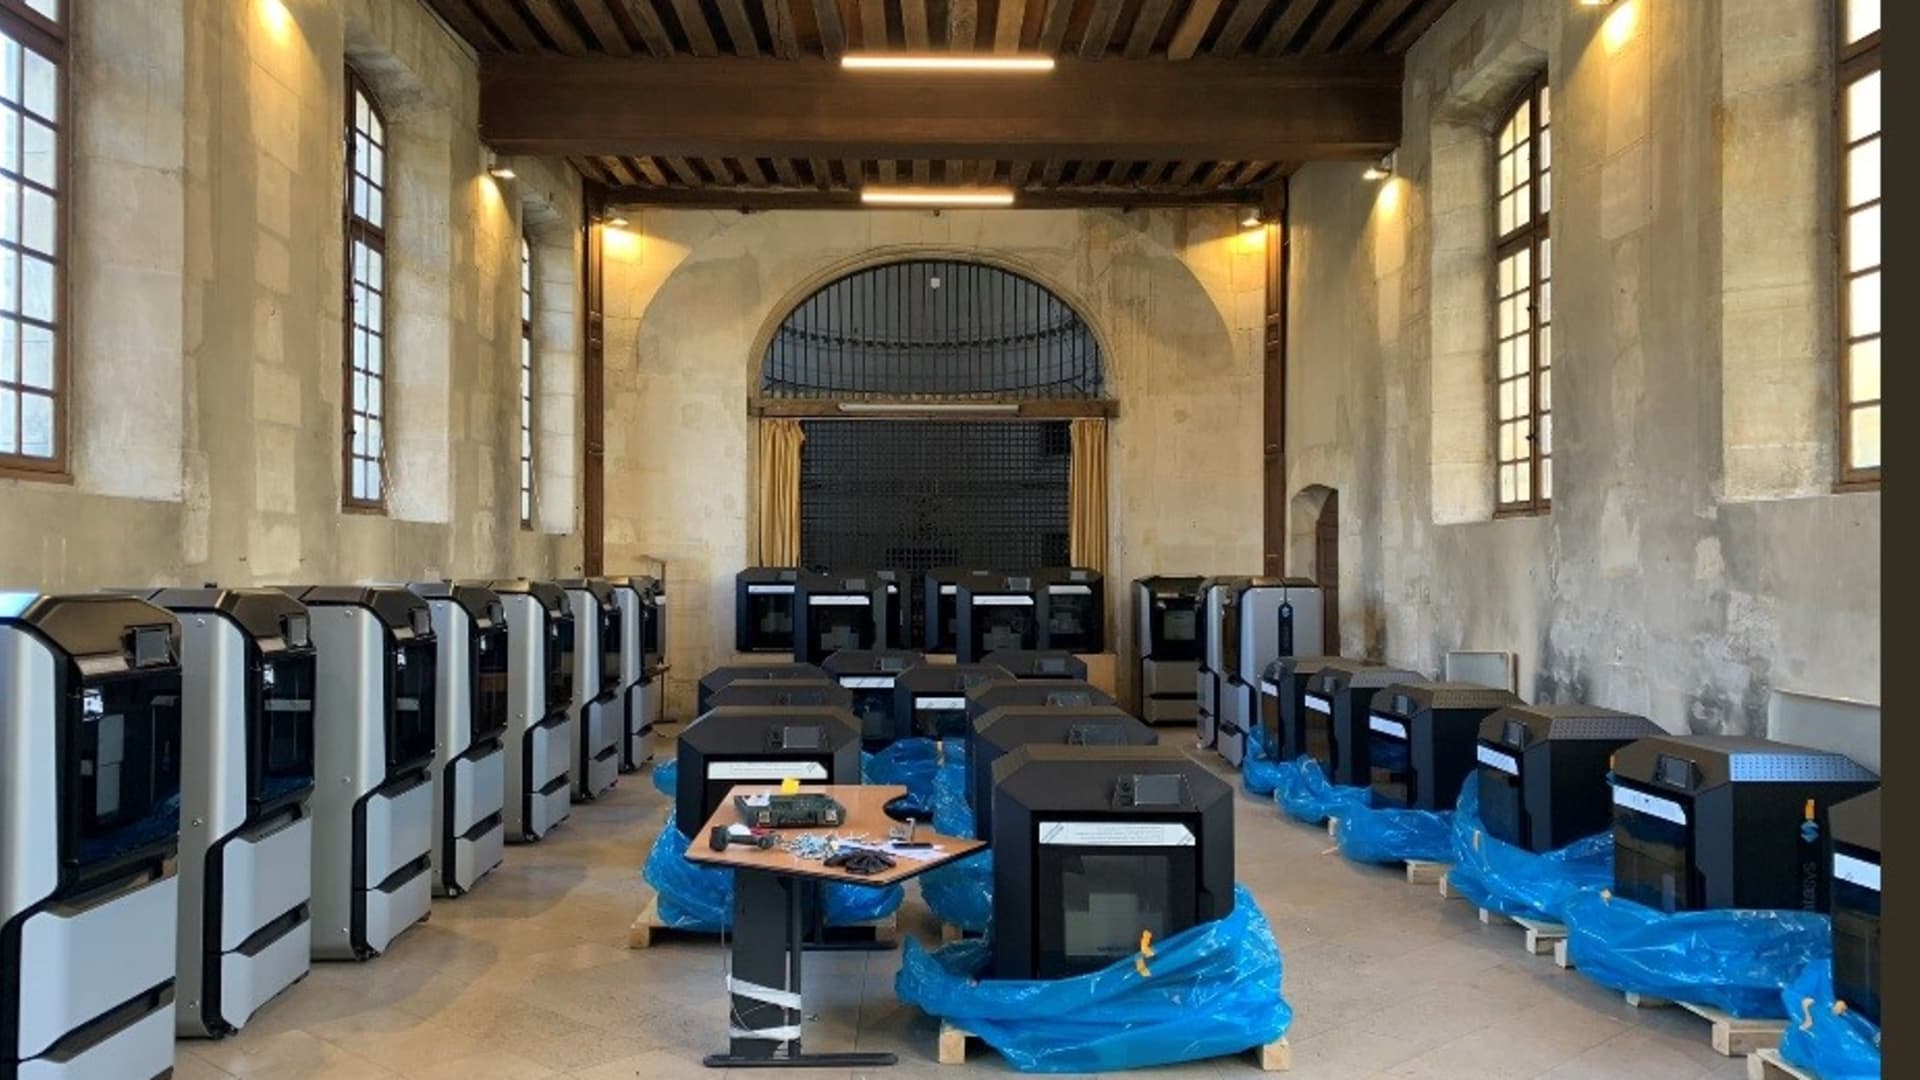 The University Hospital Trust in Paris acquired 60 FDM 3-D printers from Stratasys in late March 2020 to create an in-house rapid-response supply chain for Covid materials.